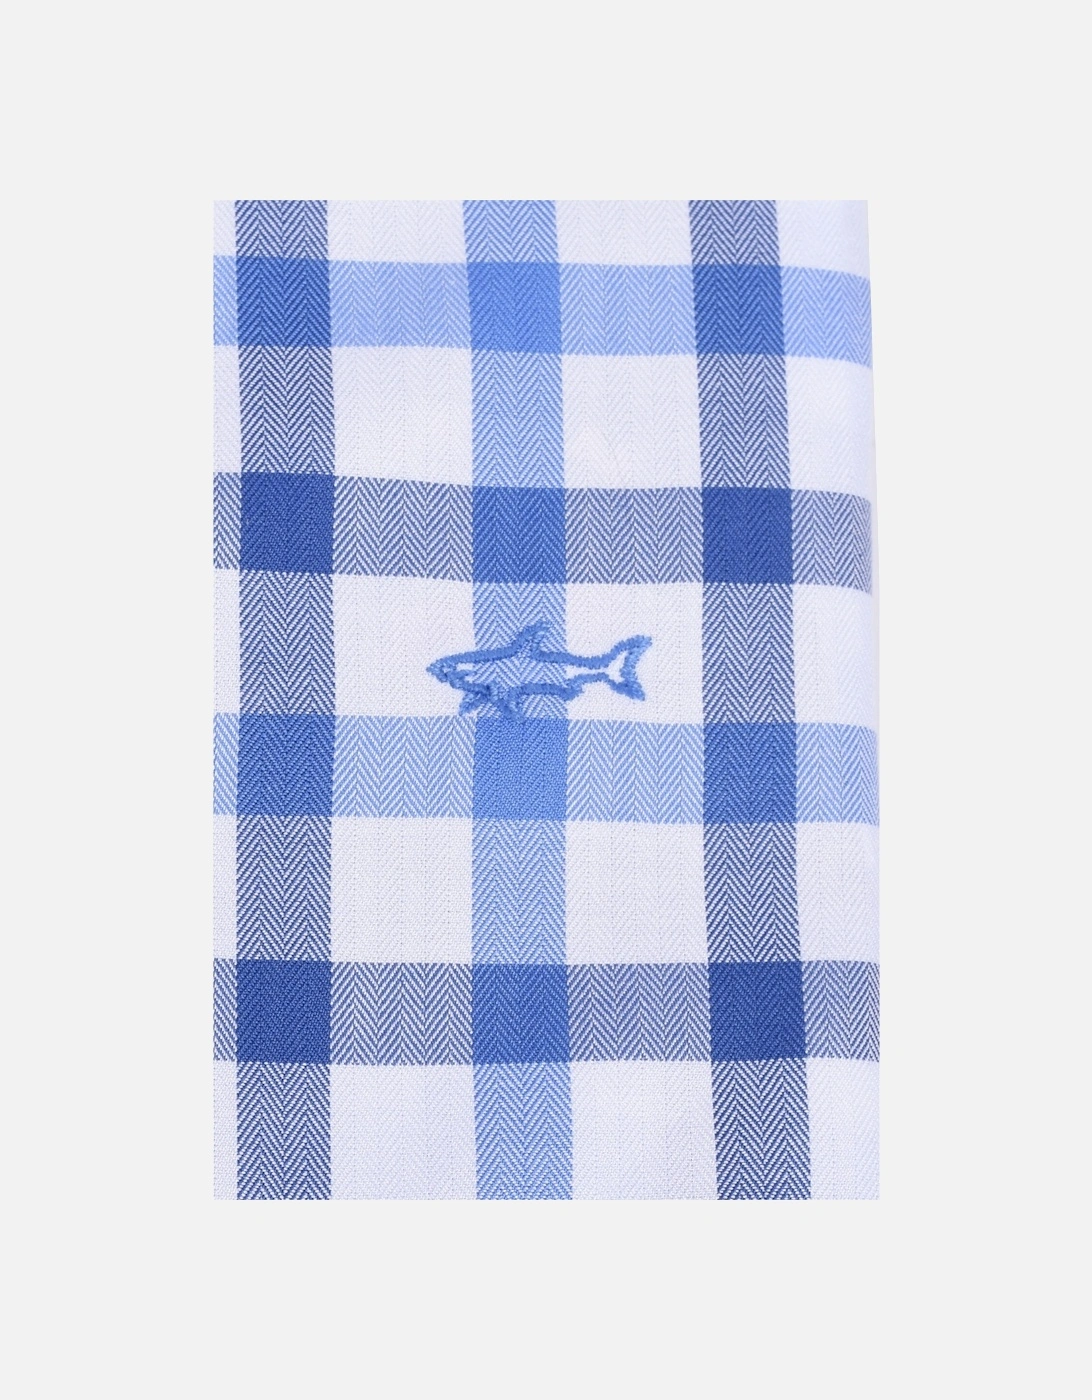 Paul And Shark Long Sleeved Checked Shirt Blue And White